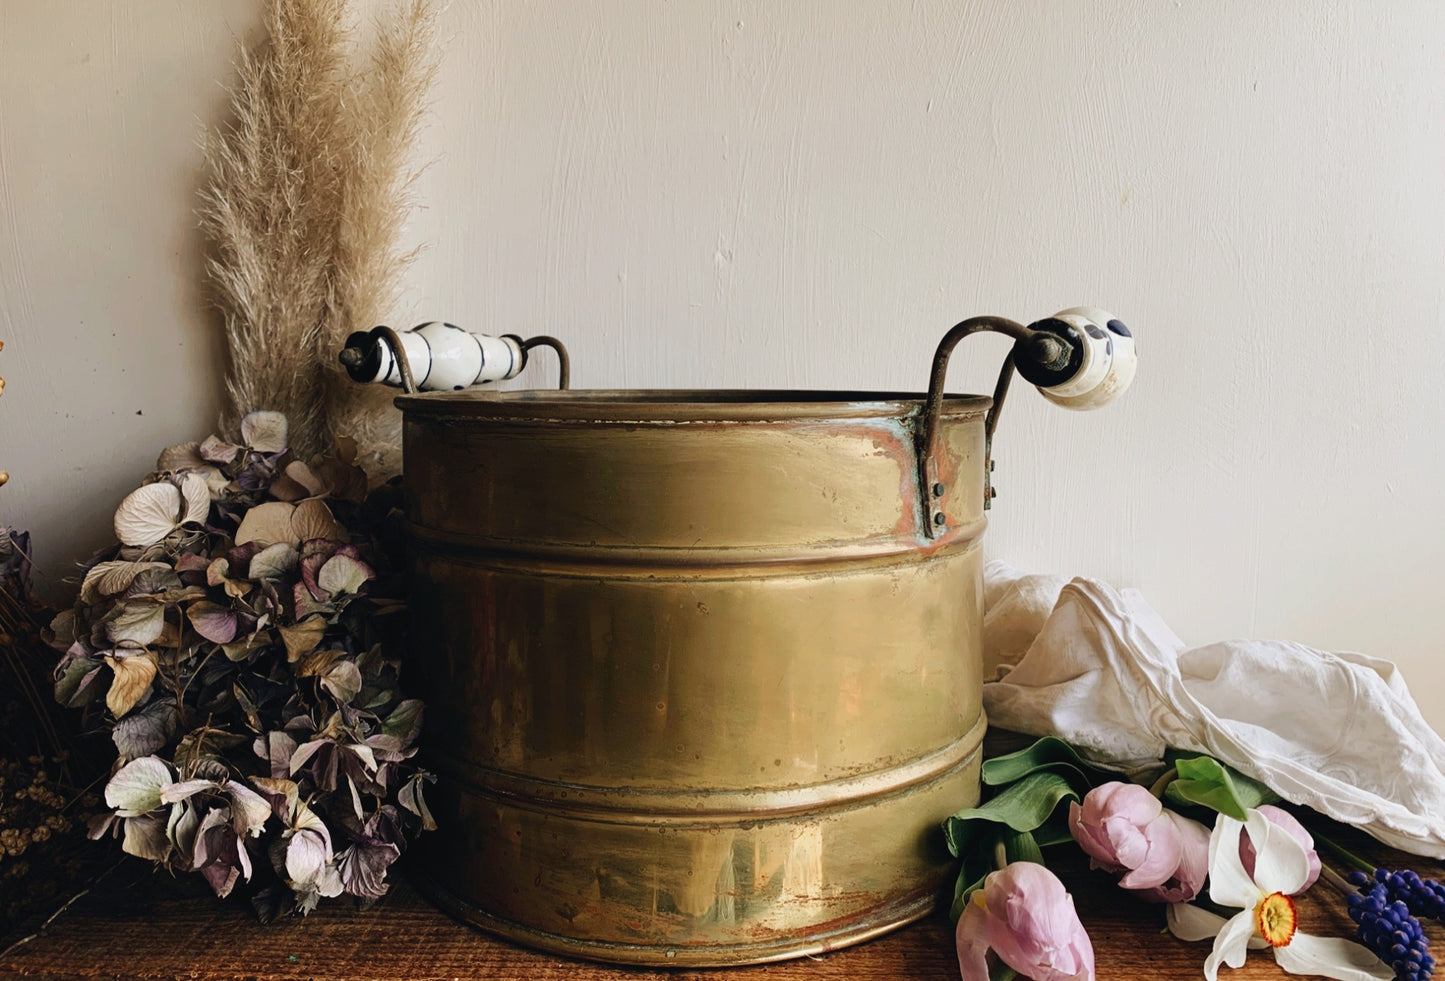 Large Antique Brass (planter) Bucket with Ceramic Floral Handles (lots of patina and rustic charm UK SHIPPING ONLY)